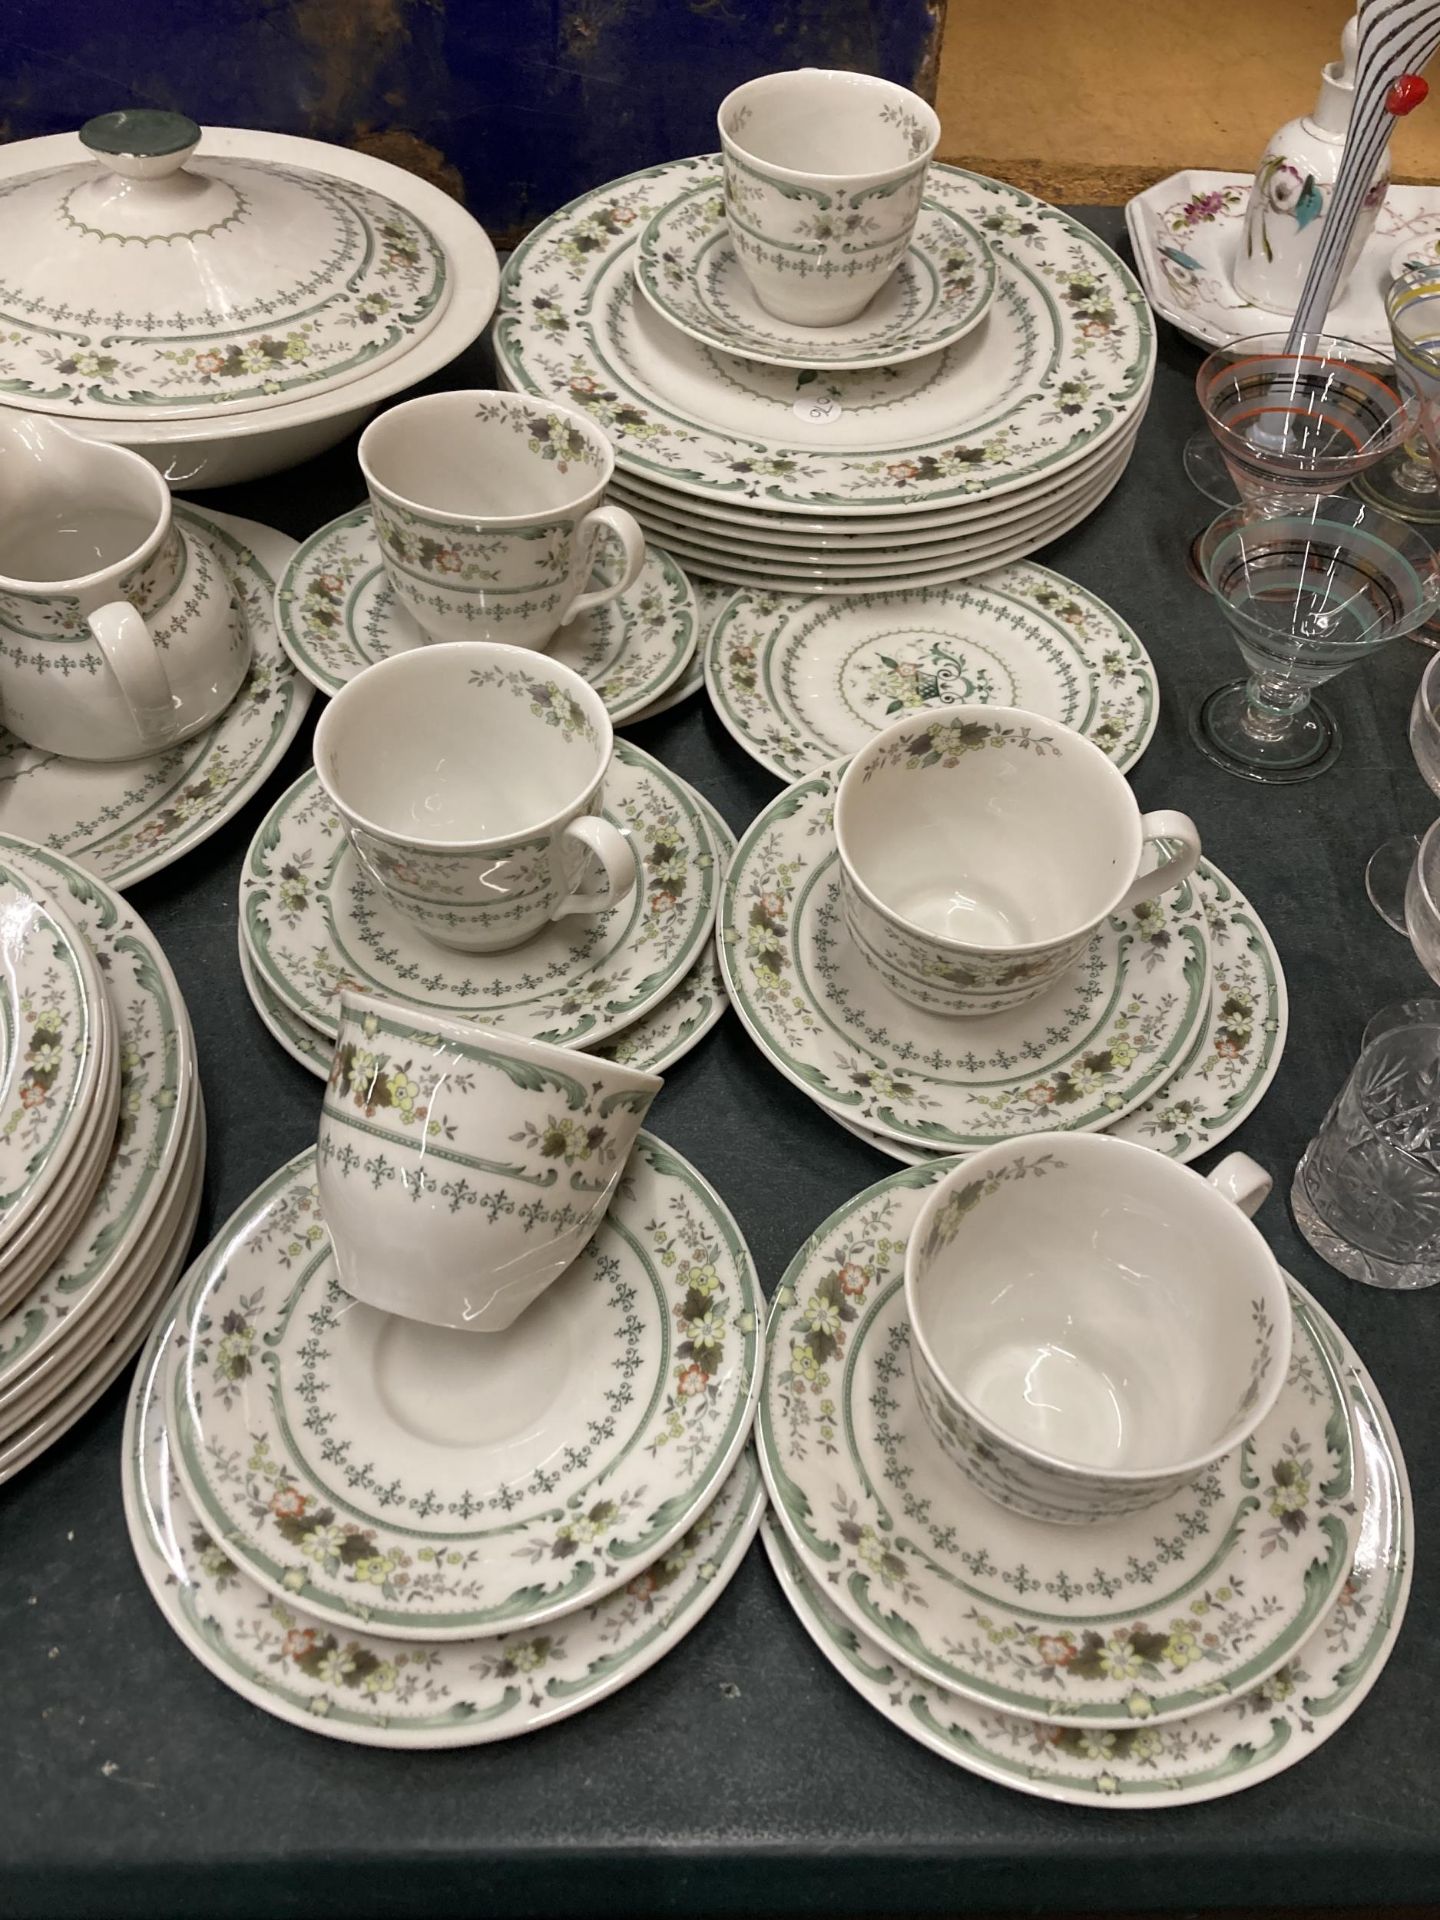 A ROYAL DOULTON PART DINNER SERVICE TO INCLUDE SERVING TUREENS, SERVING PLATES, A SAUCE BOAT WITH - Image 2 of 5